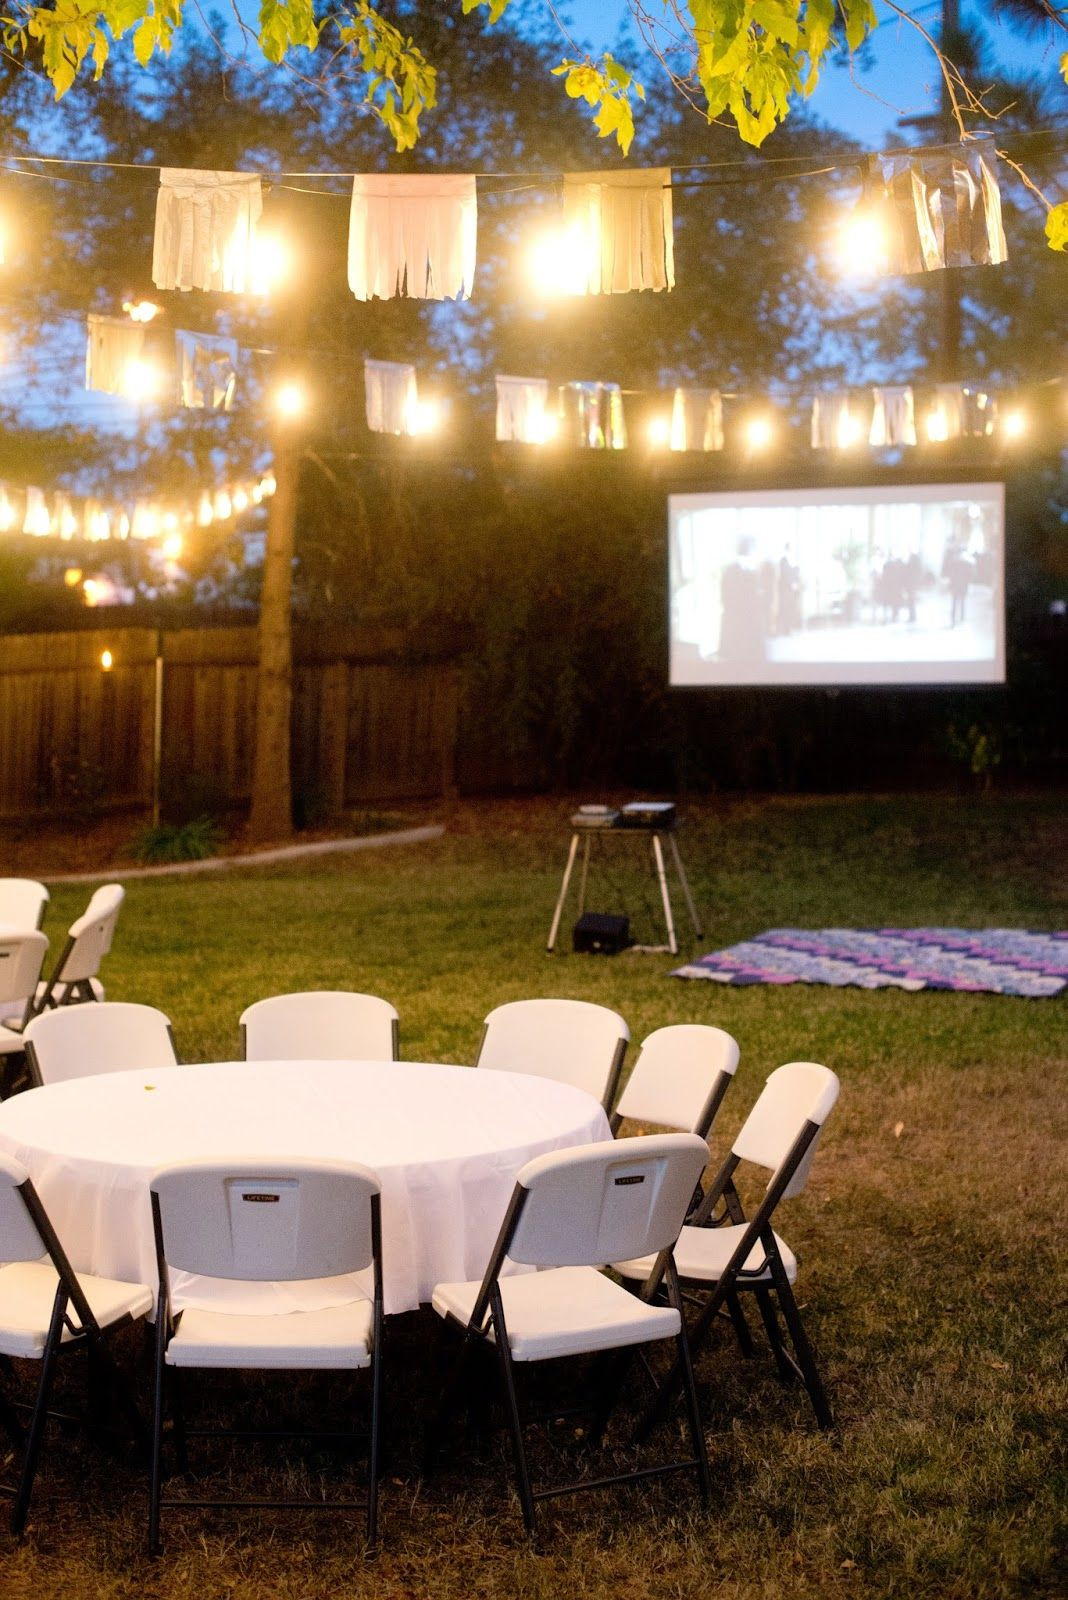 Backyard Party Ideas Decorating
 Fall Backyard Birthday Party and Movie Night in 2019